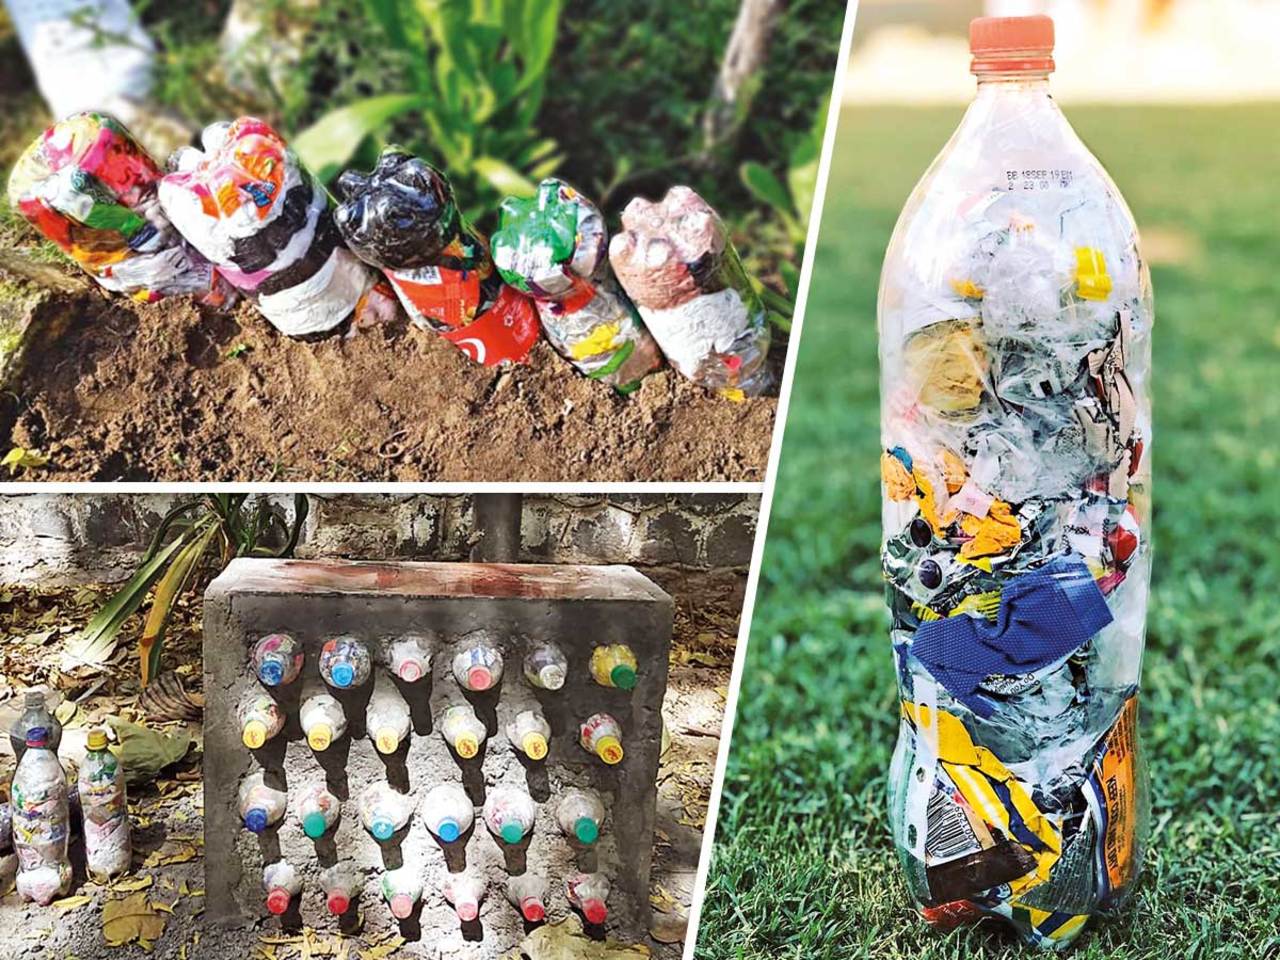 Plastic packets, snack wrappers, glittery paper: Upcycle trash